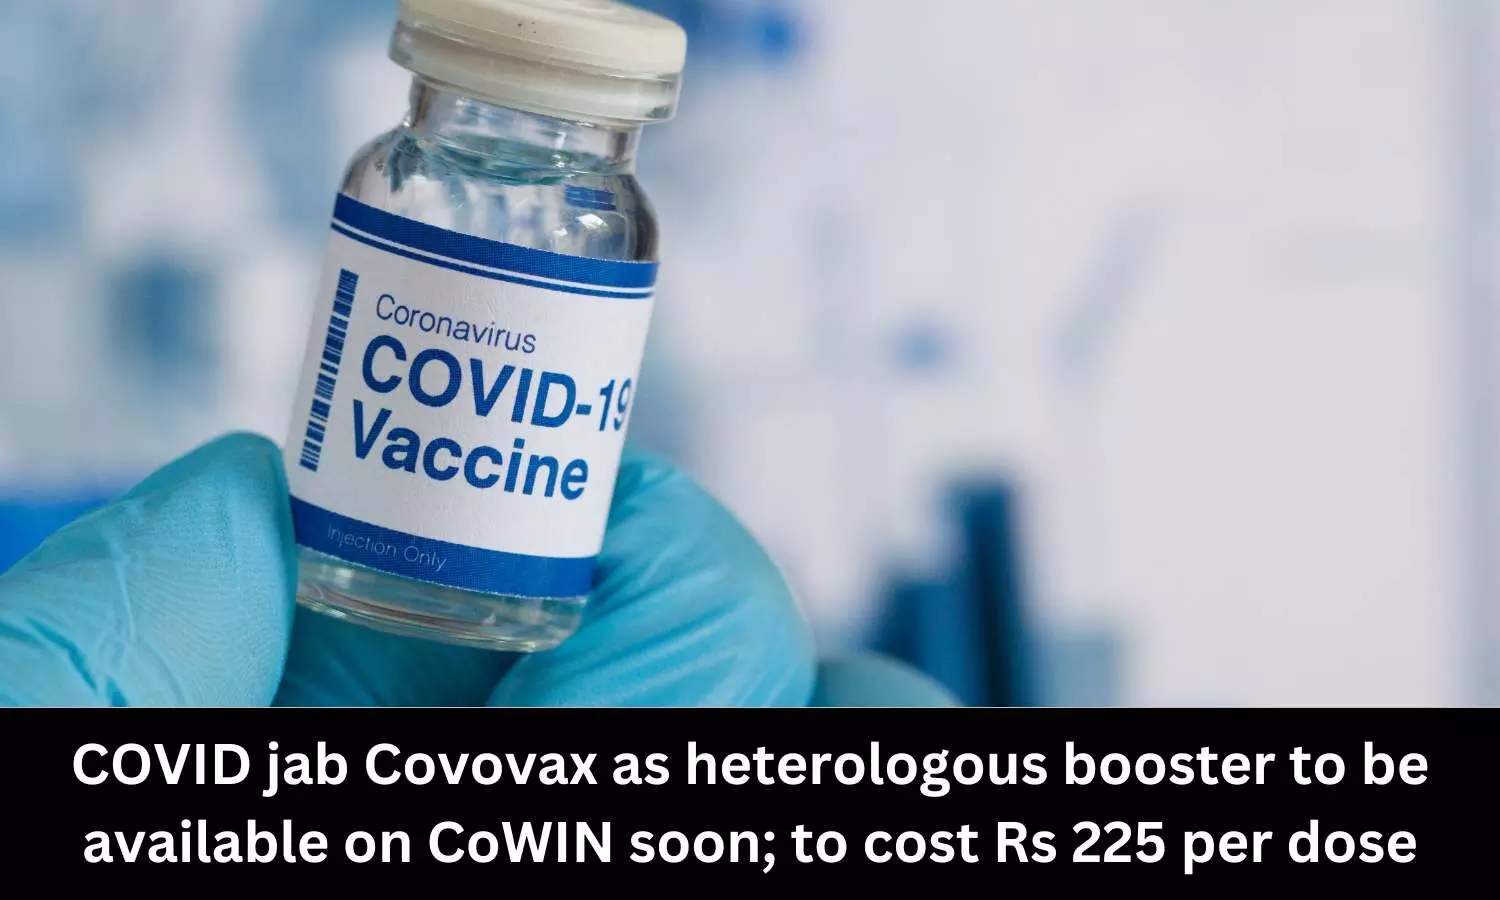 SII Covovax as heterologous booster to be available on CoWIN soon; to cost Rs 225 per dose